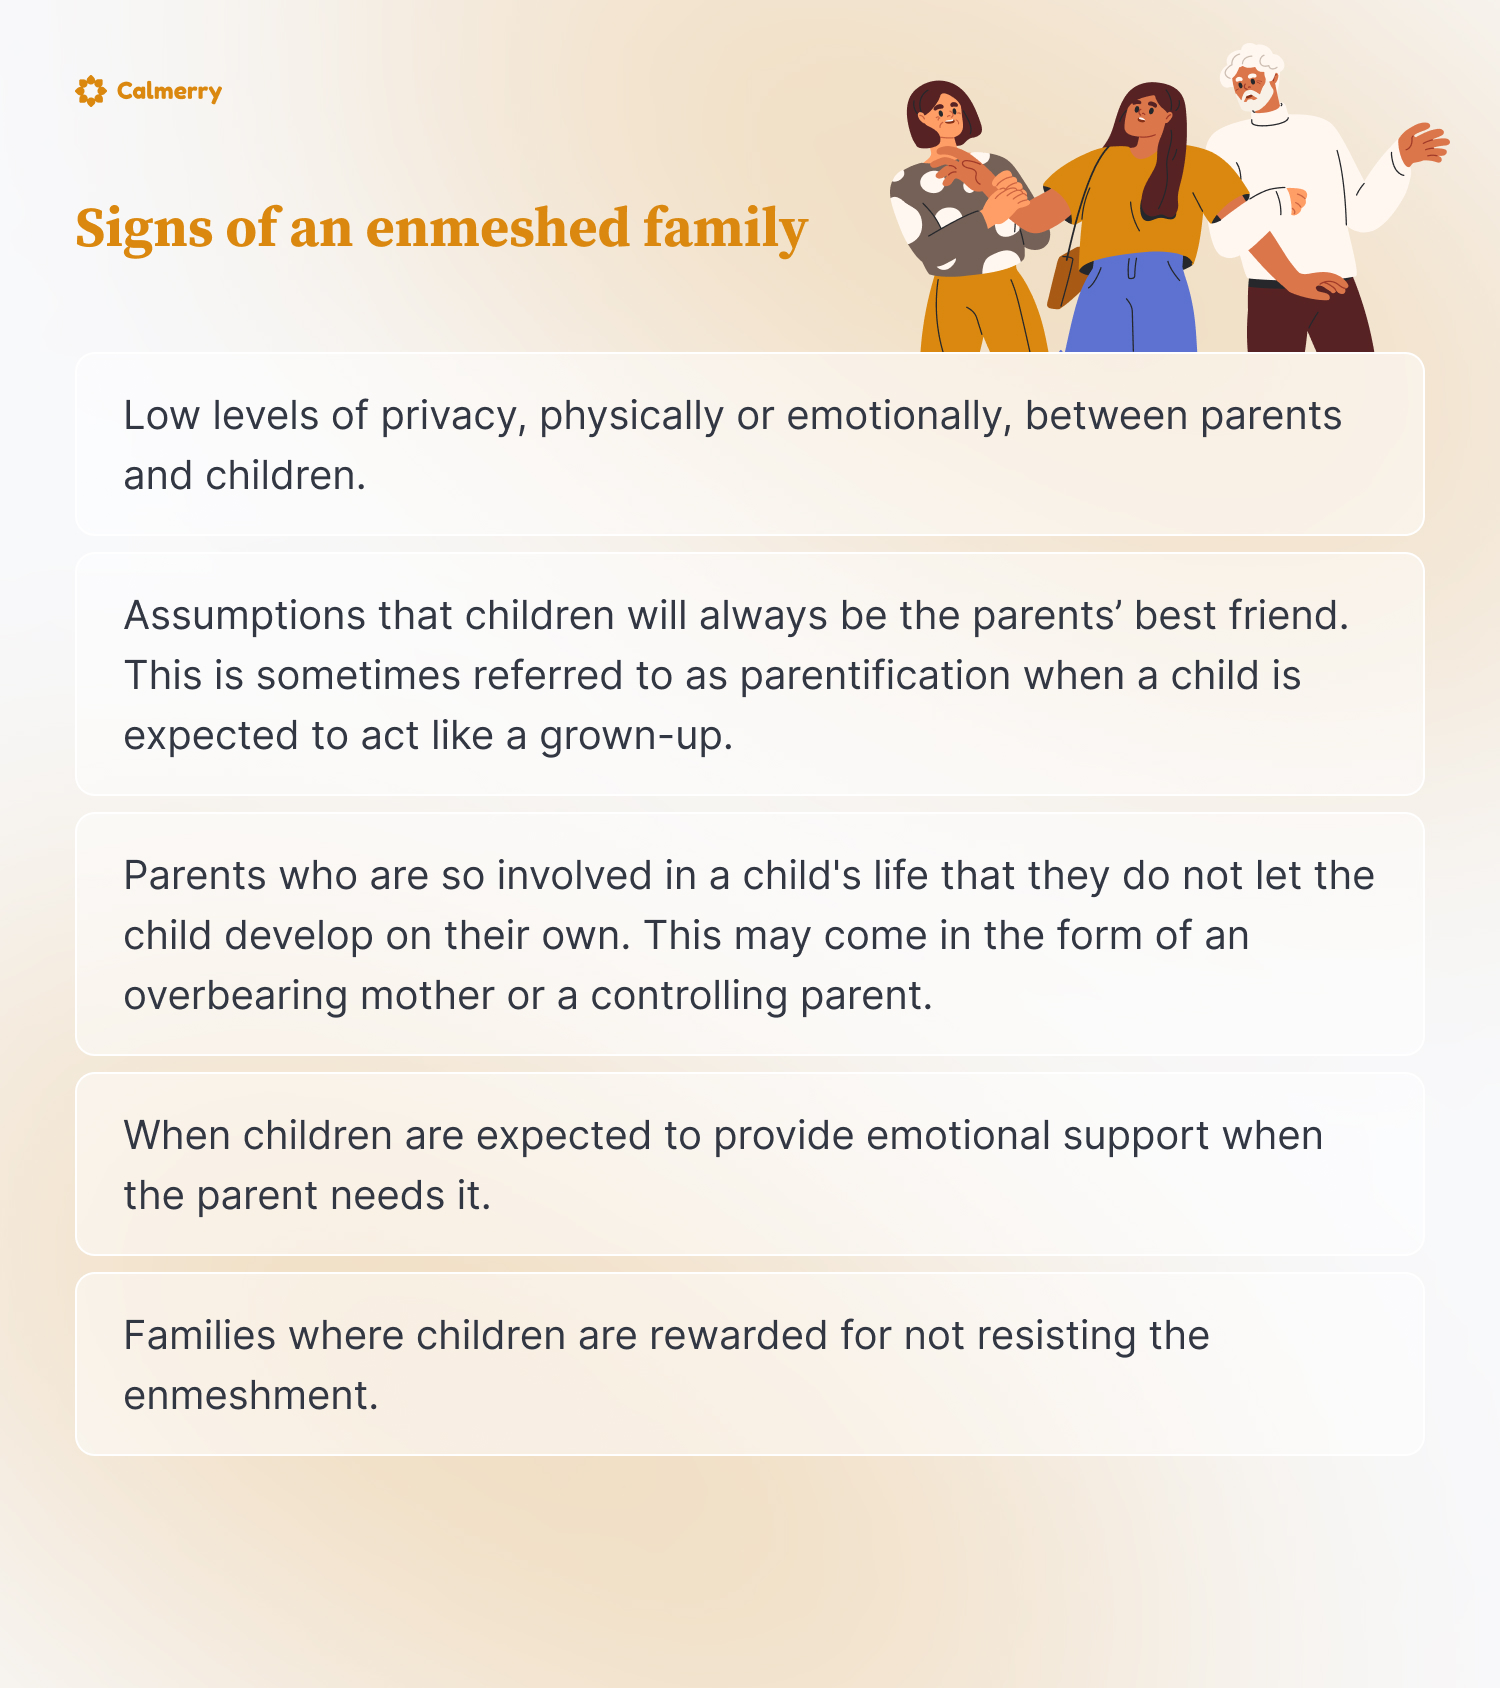 Low levels of privacy, physically or emotionally, between parents and children.
Assumptions that children will always be the parents’ best friend. This is sometimes referred to as parentification when a child is expected to act like a grown-up.
Parents who are so involved in a child's life that they do not let the child develop on their own. This may come in the form of an overbearing mother or a controlling parent.
When children are expected to provide emotional support when the parent needs it. This would be another example of parentification.
Families where children are rewarded for not resisting the enmeshment.